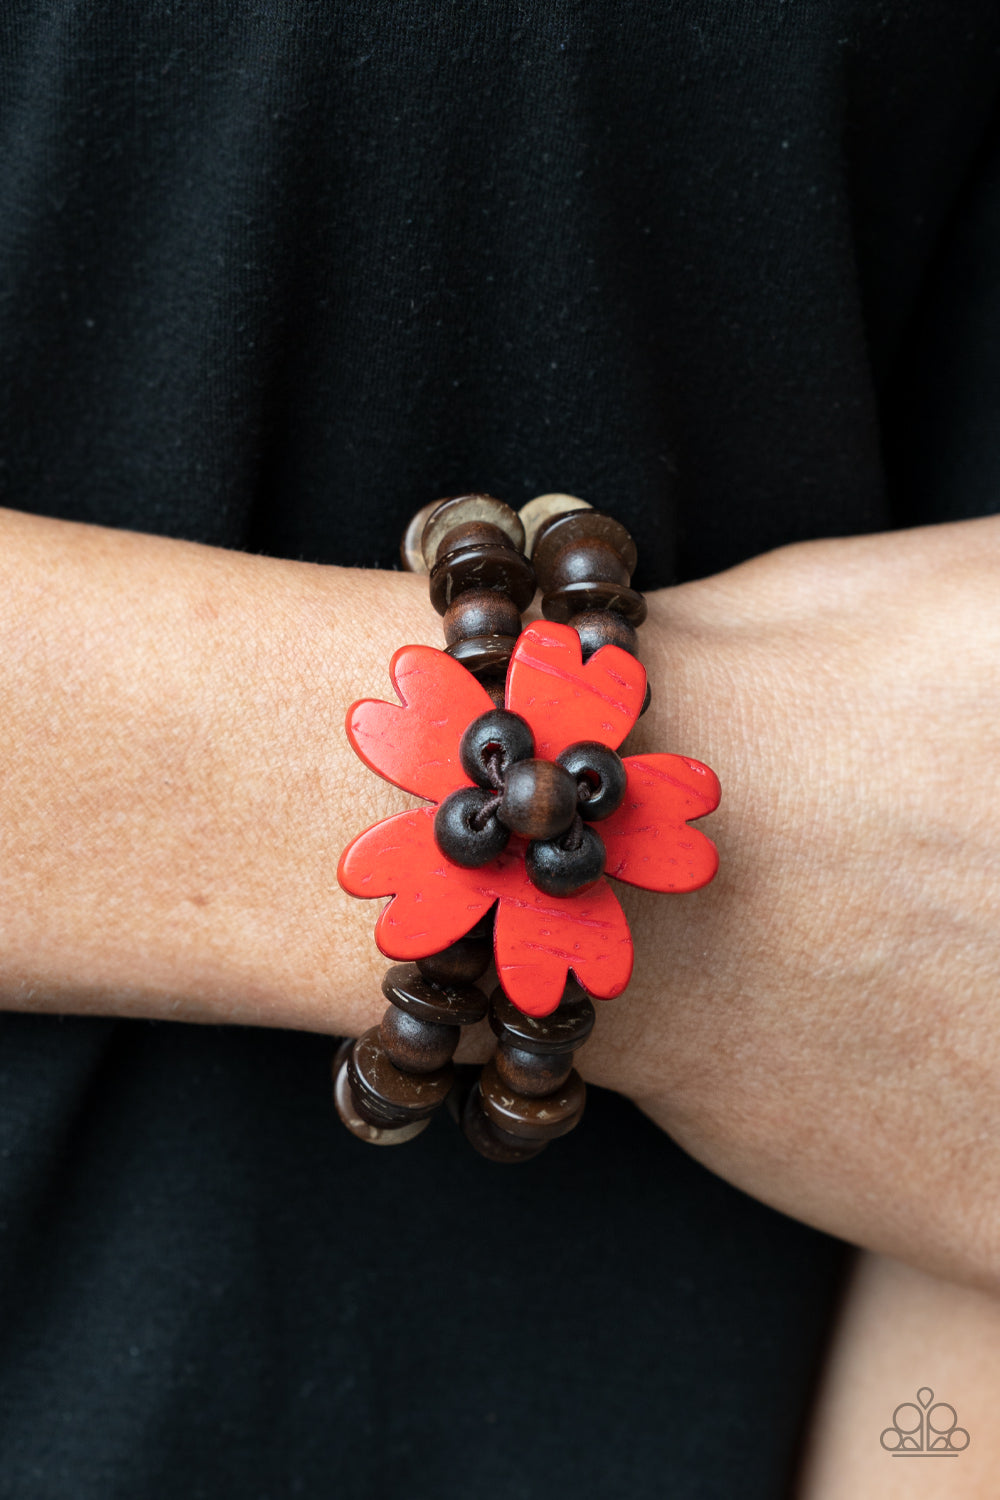 Tropical Flavor Red Wooden Bracelet - Paparazzi Accessories.  Featuring heart-shaped petals, a bright red wooden flower sits atop double strands of wooden beads threaded along stretchy bands for a tropical flair atop the wrist.  ﻿﻿﻿All Paparazzi Accessories are lead free and nickel free!  Sold as one individual bracelet.